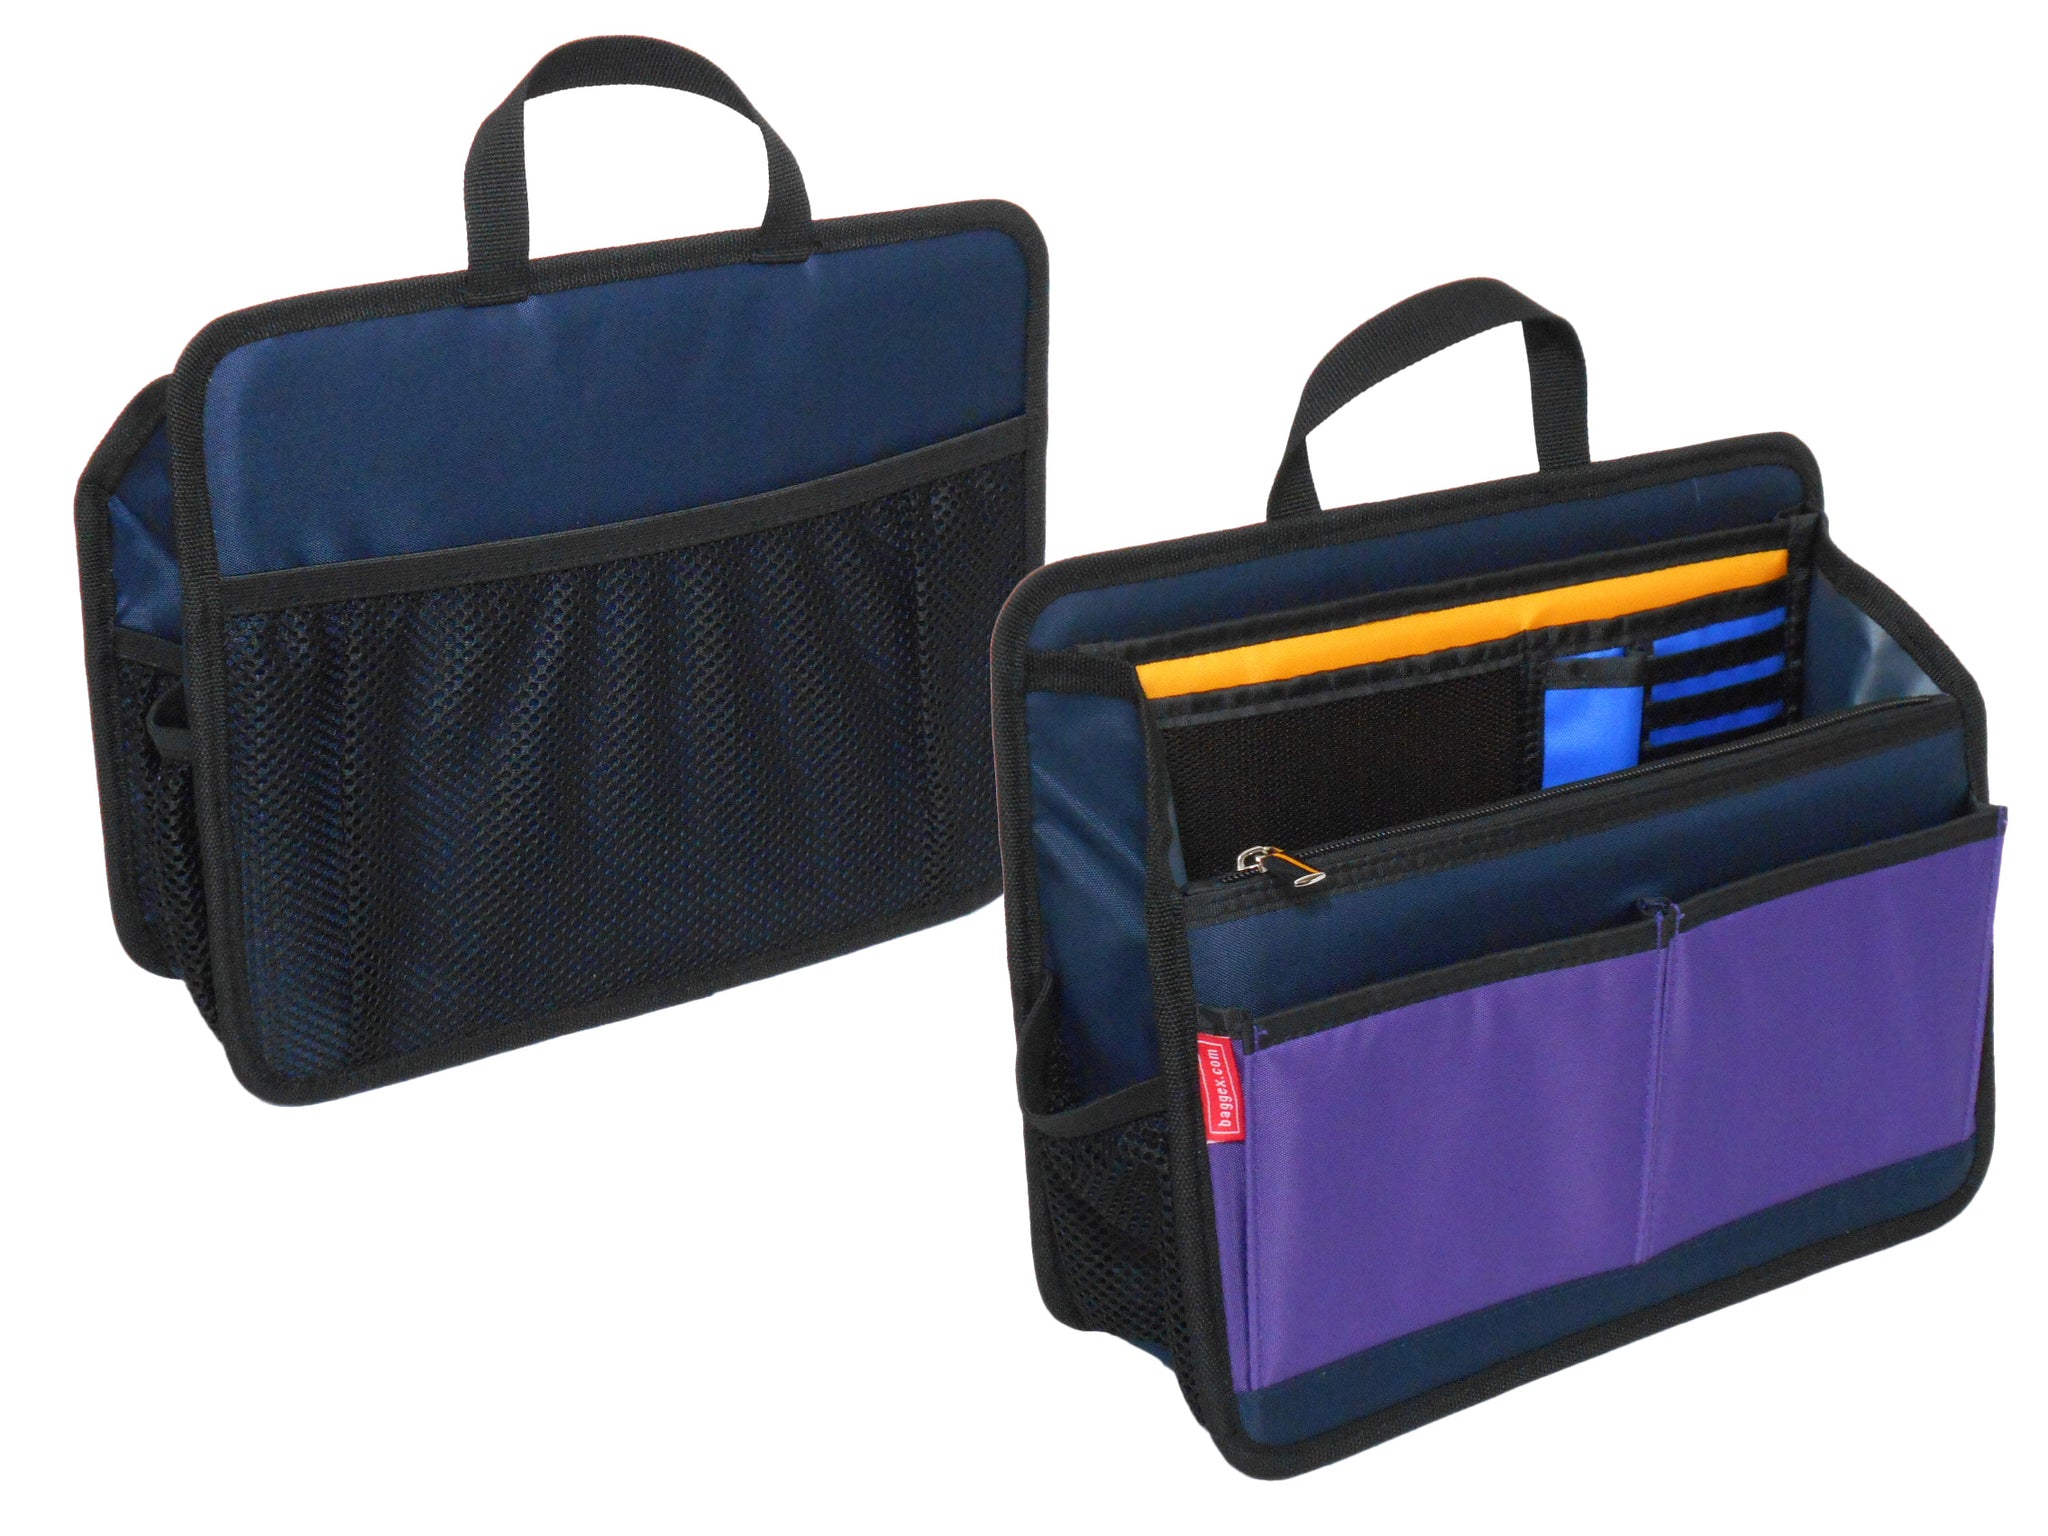 Handbag/Briefcase Insert Organizer with Gusset (L) – Baggex Store